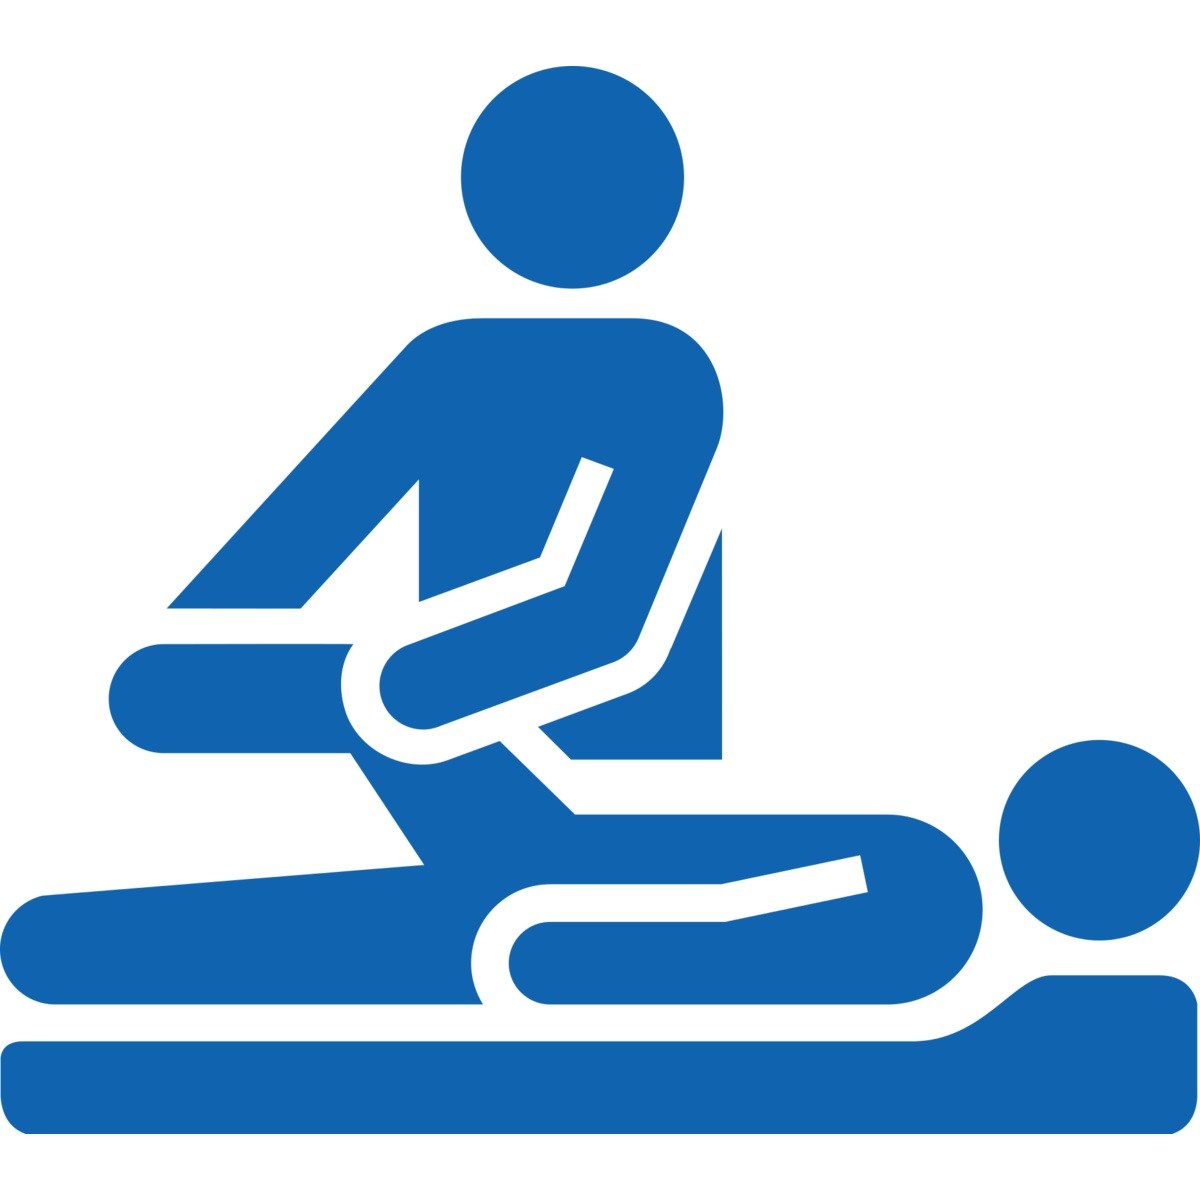 massages clipart physical therapist assistant